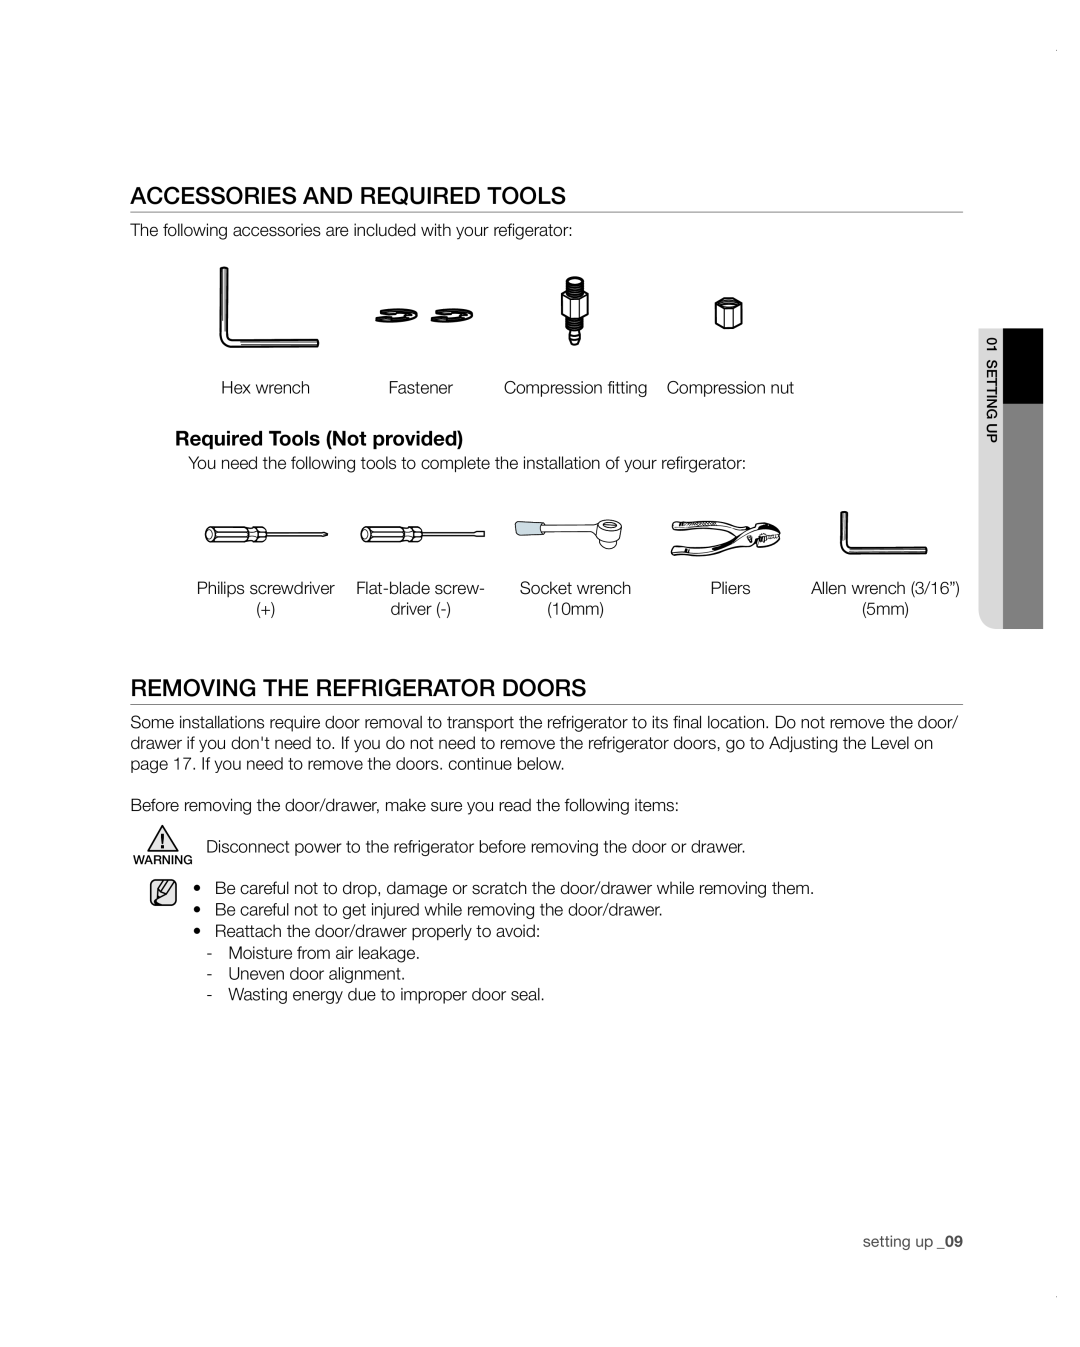 Samsung RF4287HARS user manual Accessories and required tools, Removing the refrigerator doors, Required Tools Not provided 